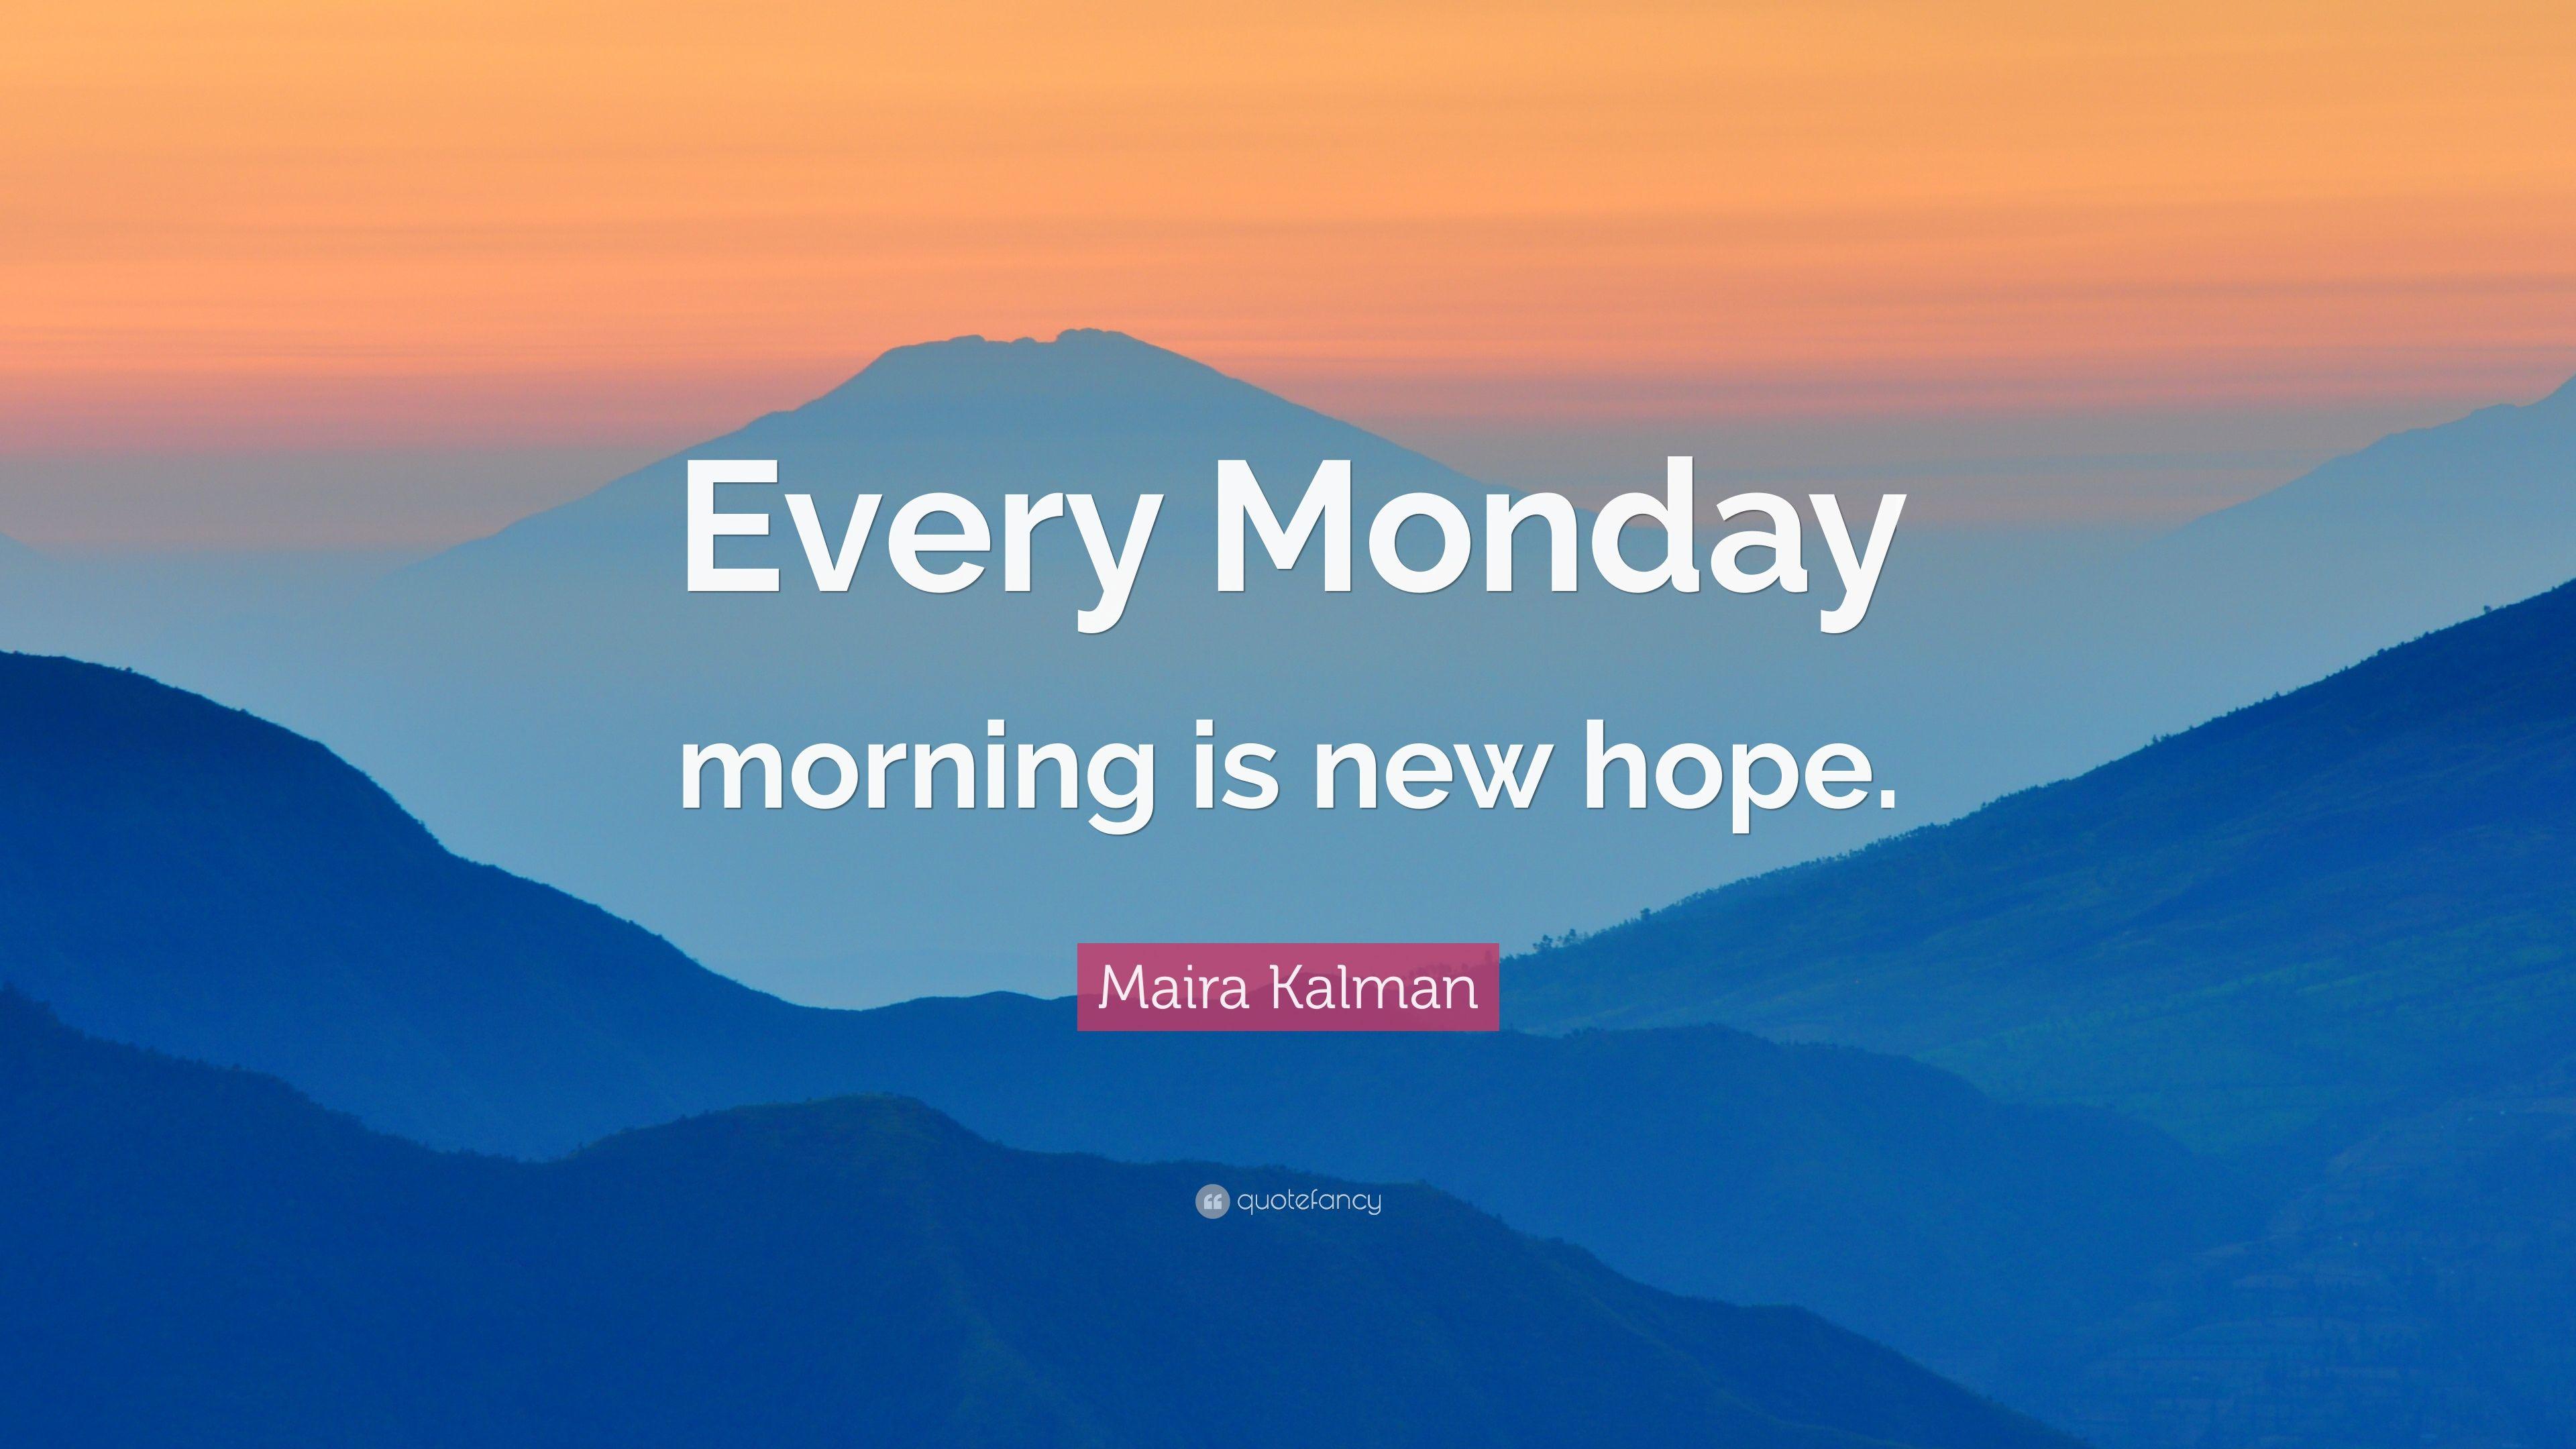 Maira Kalman Quote: “Every Monday morning is new hope.” 10